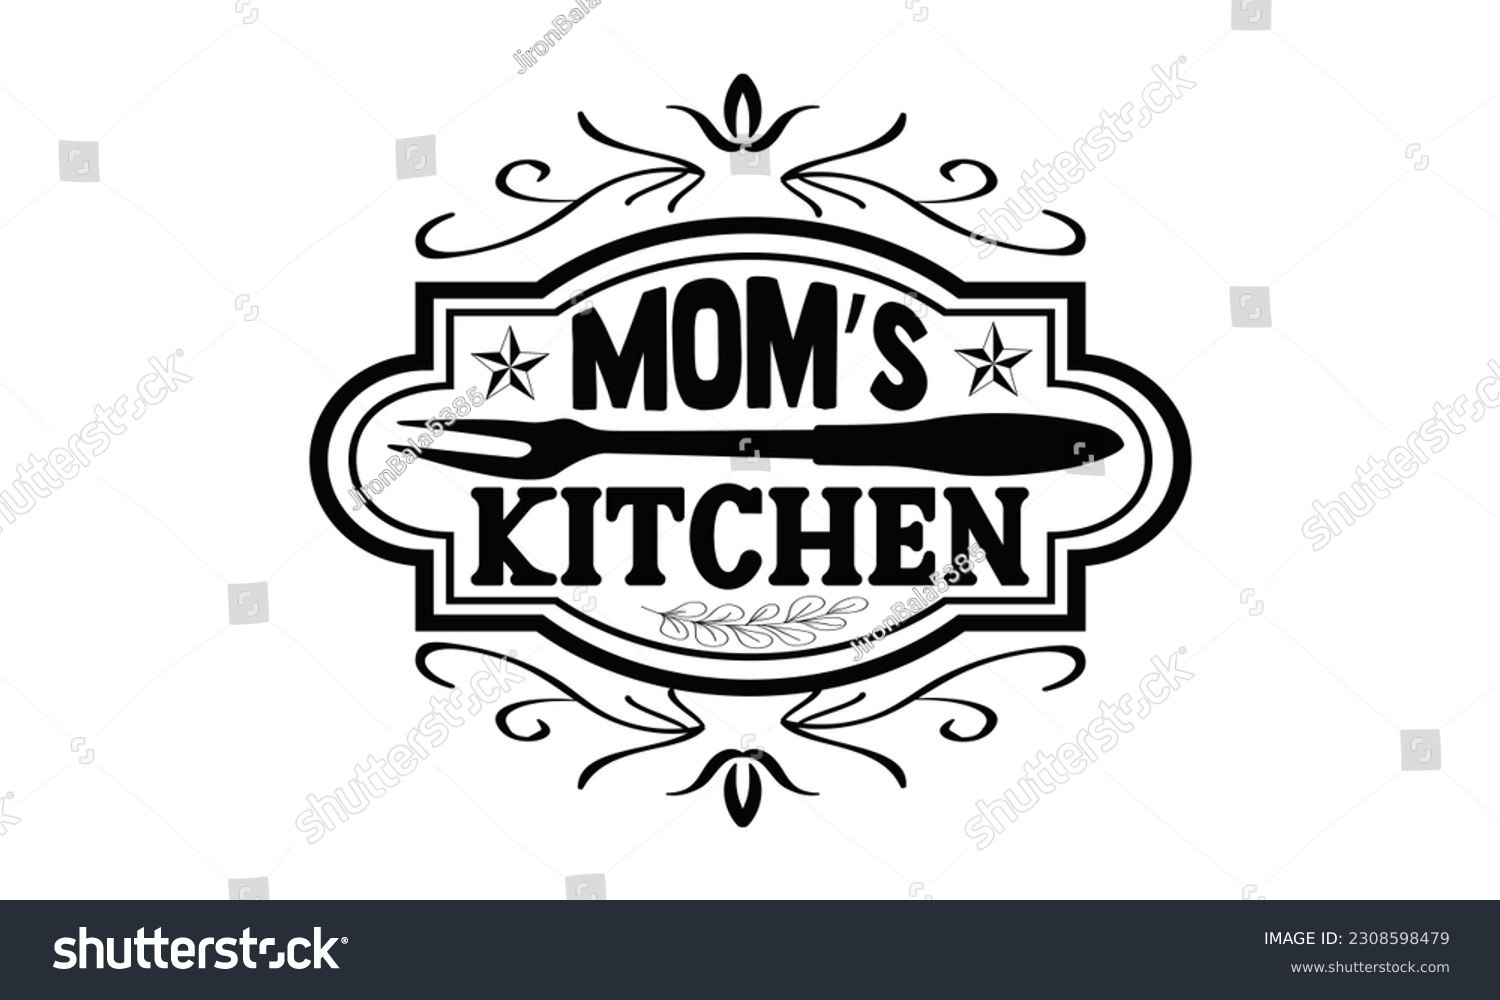 SVG of Mom’s Kitchen - Cooking SVG Design, Hand drawn vintage hand lettering, EPS, Files for Cutting, Illustration for prints on t-shirts, bags, posters, cards and Mug. svg